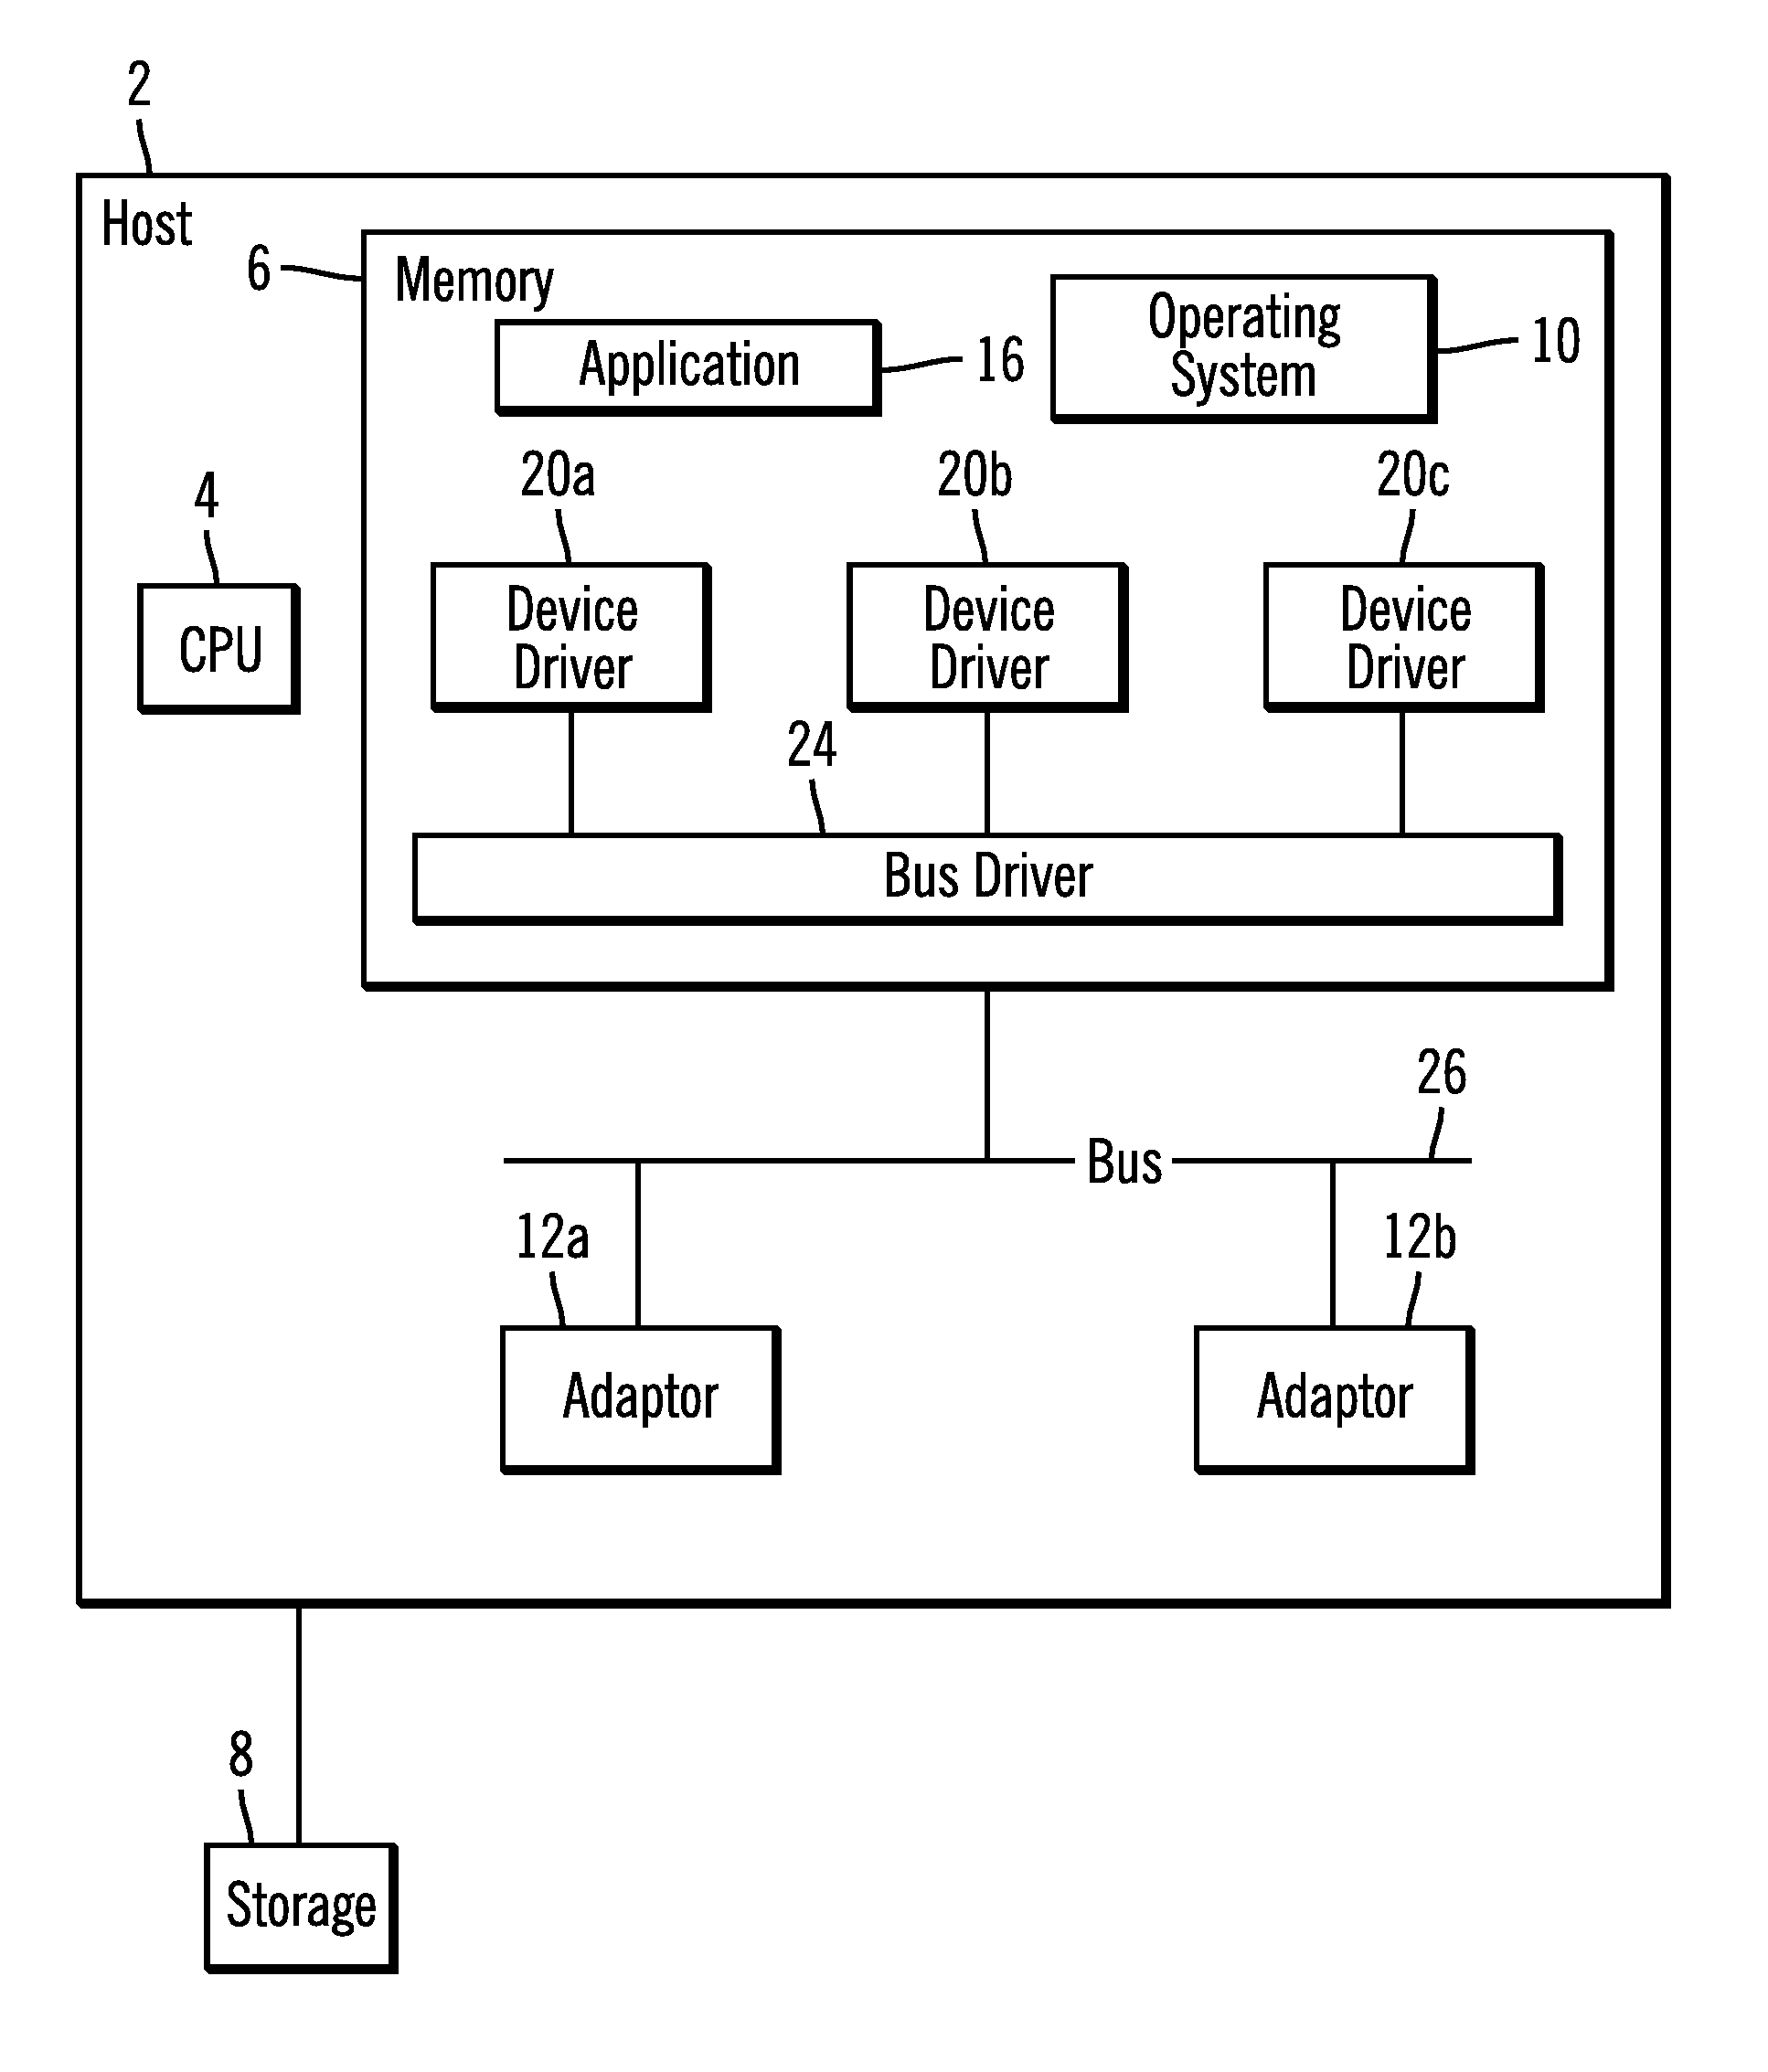 Multiple physical interfaces in a slot of a storage enclosure to support different storage interconnect architectures